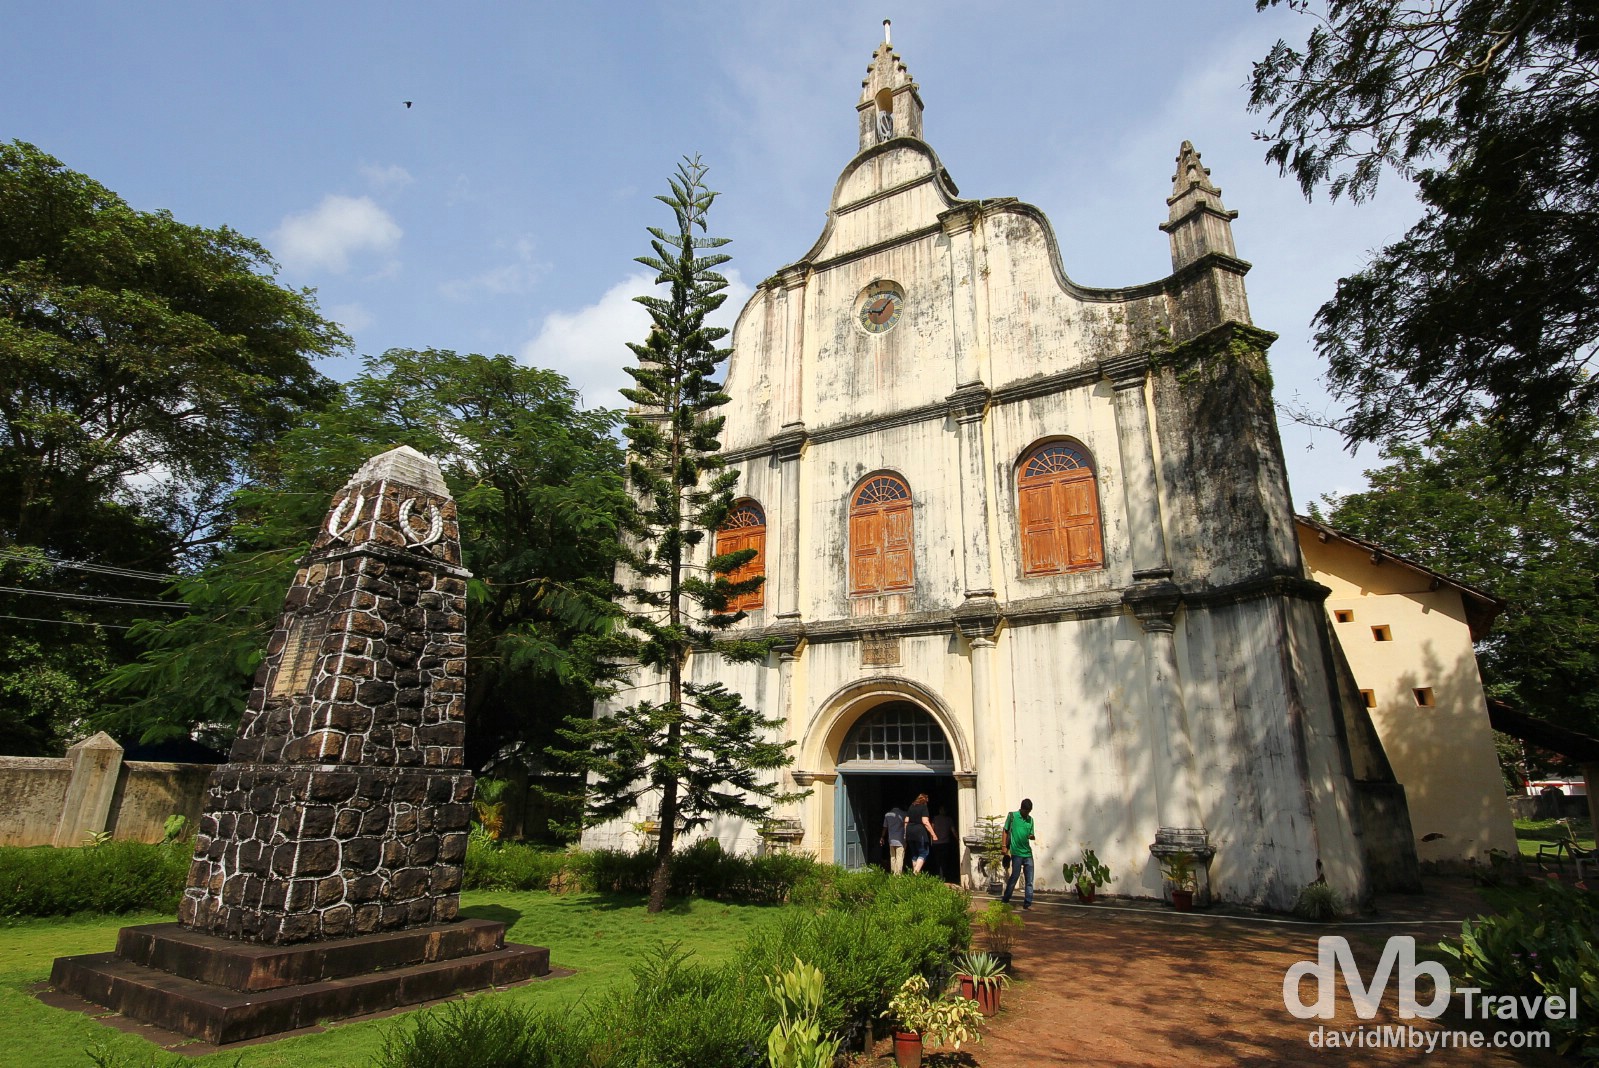 The 1503 AD St. Francis Church, Fort Cochin, Kerala, India. September 18th 2012.